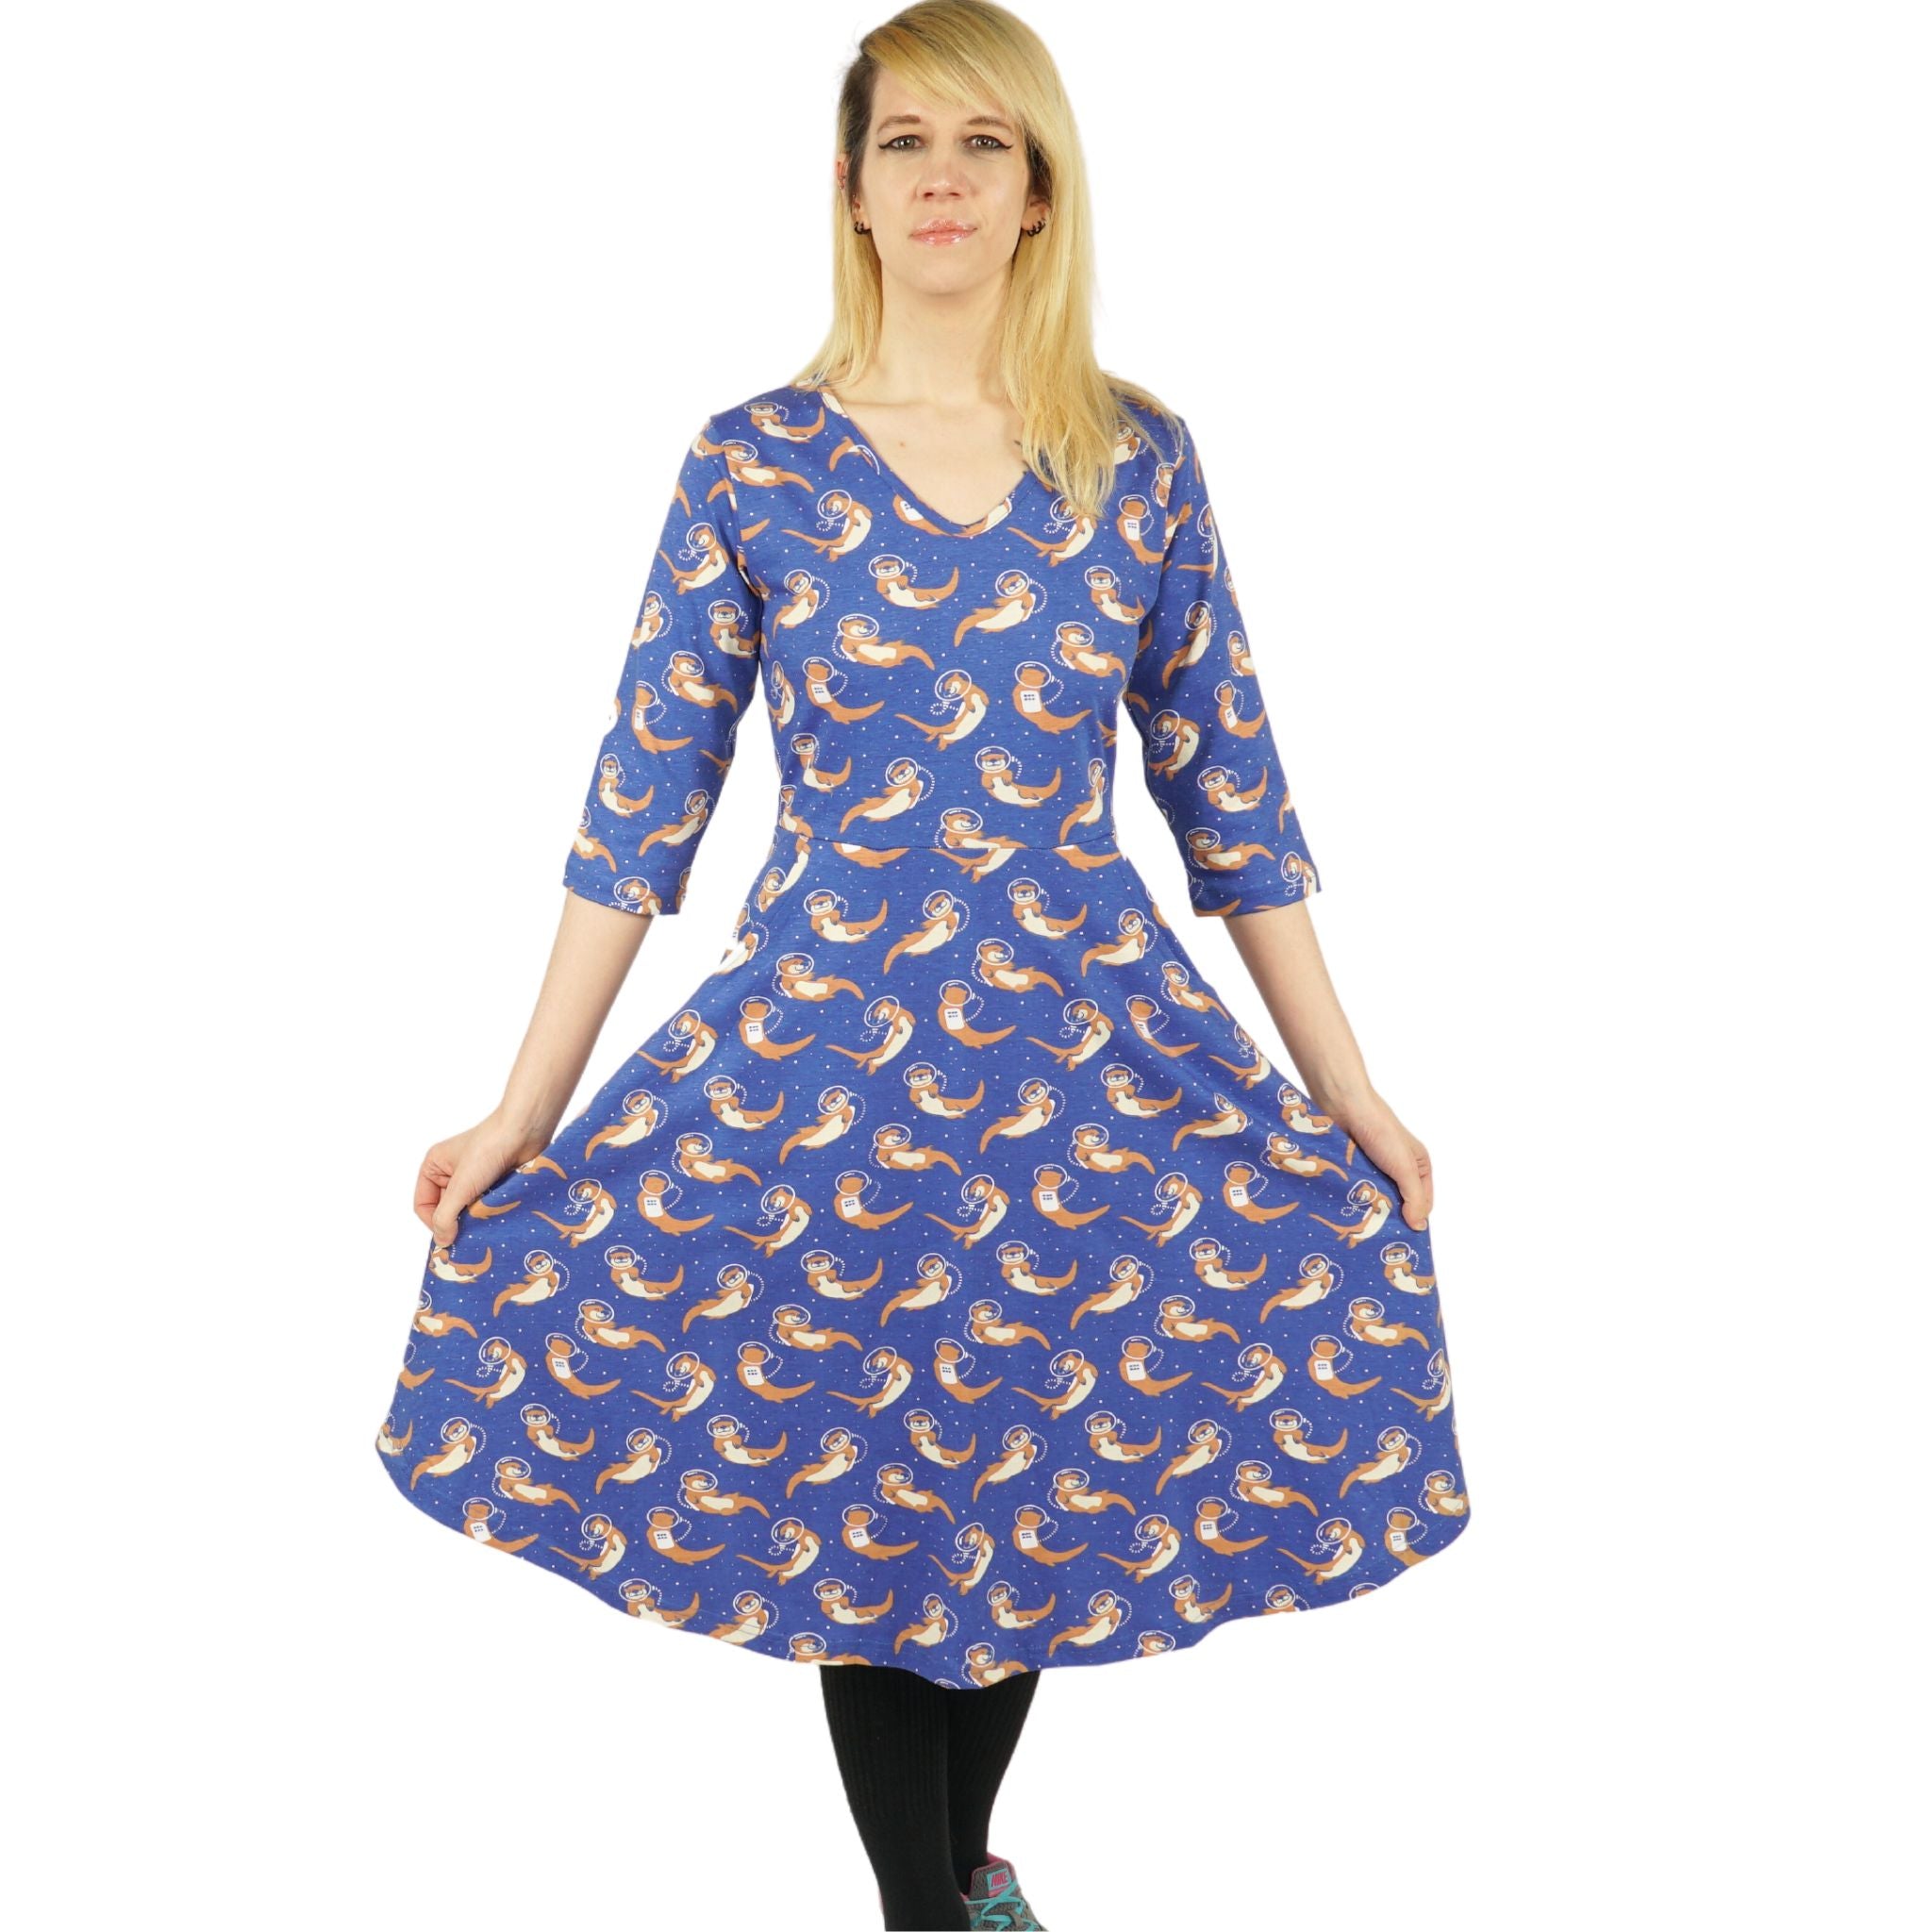 Otters in Space 3/4th Sleeves Fit & Flare Dress